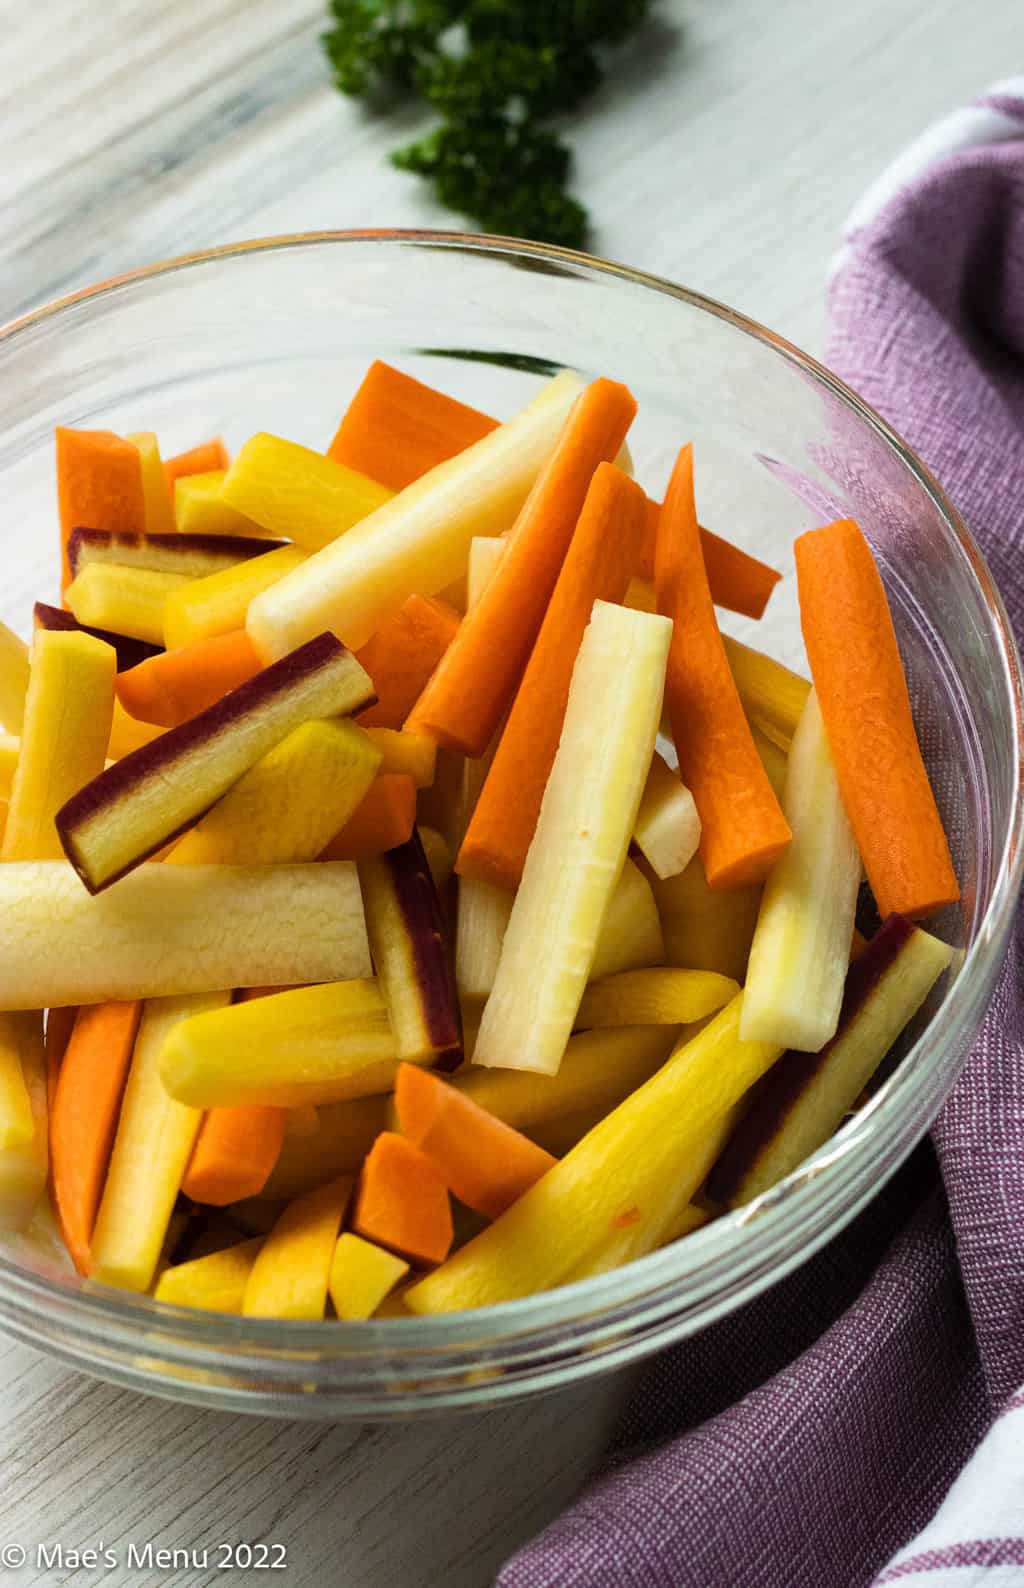 An elevated side shot of a clear bowl of cut up rainbow carrots.